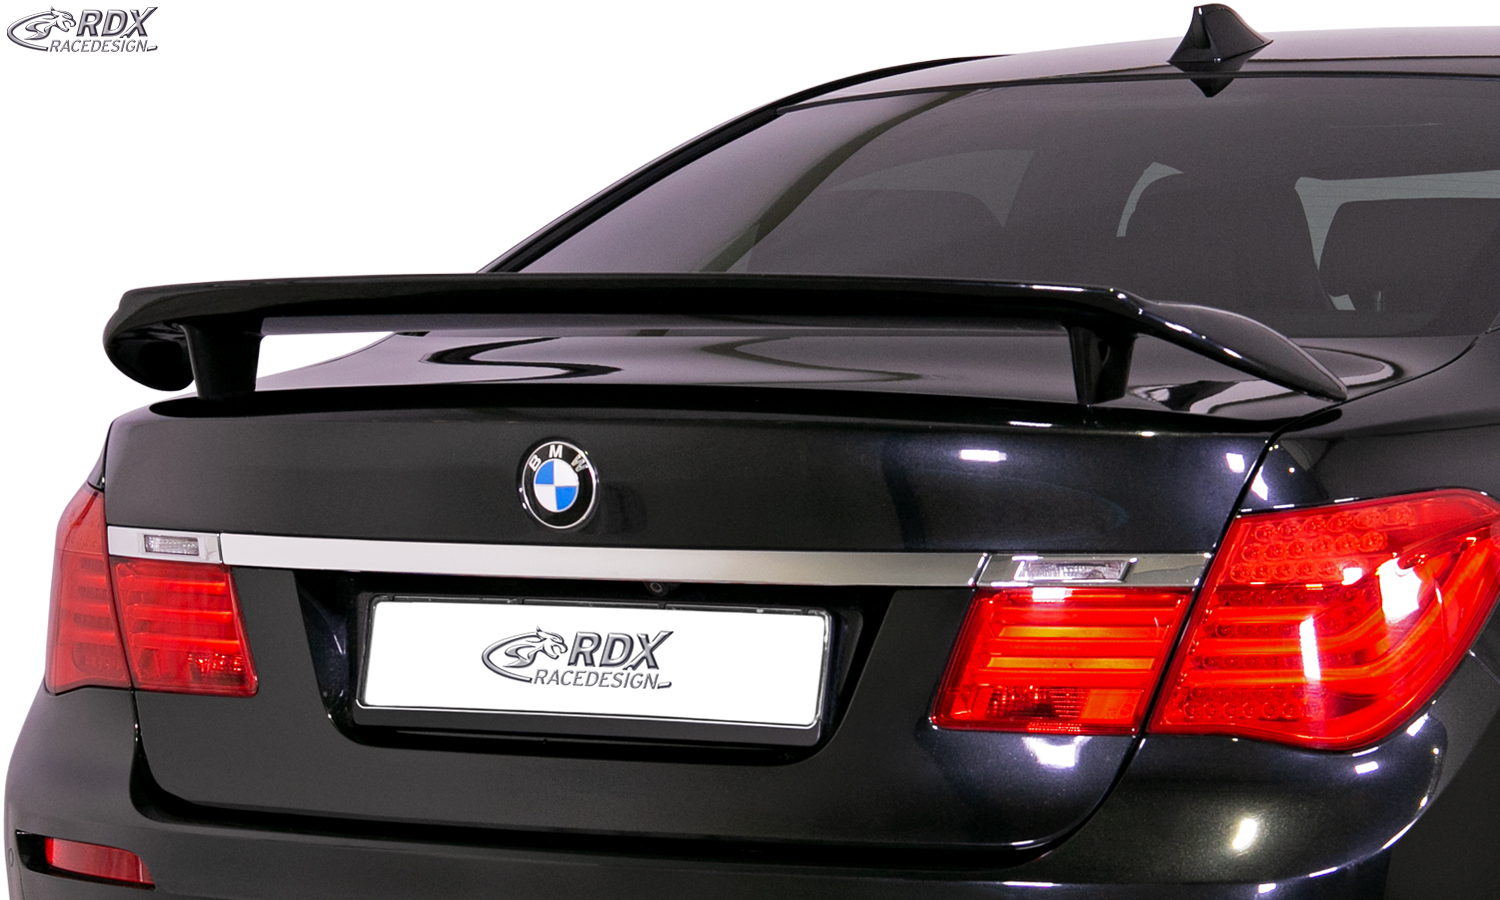 RDX Rear Spoiler for BMW 7-series  F01 / F02 Rear Wing